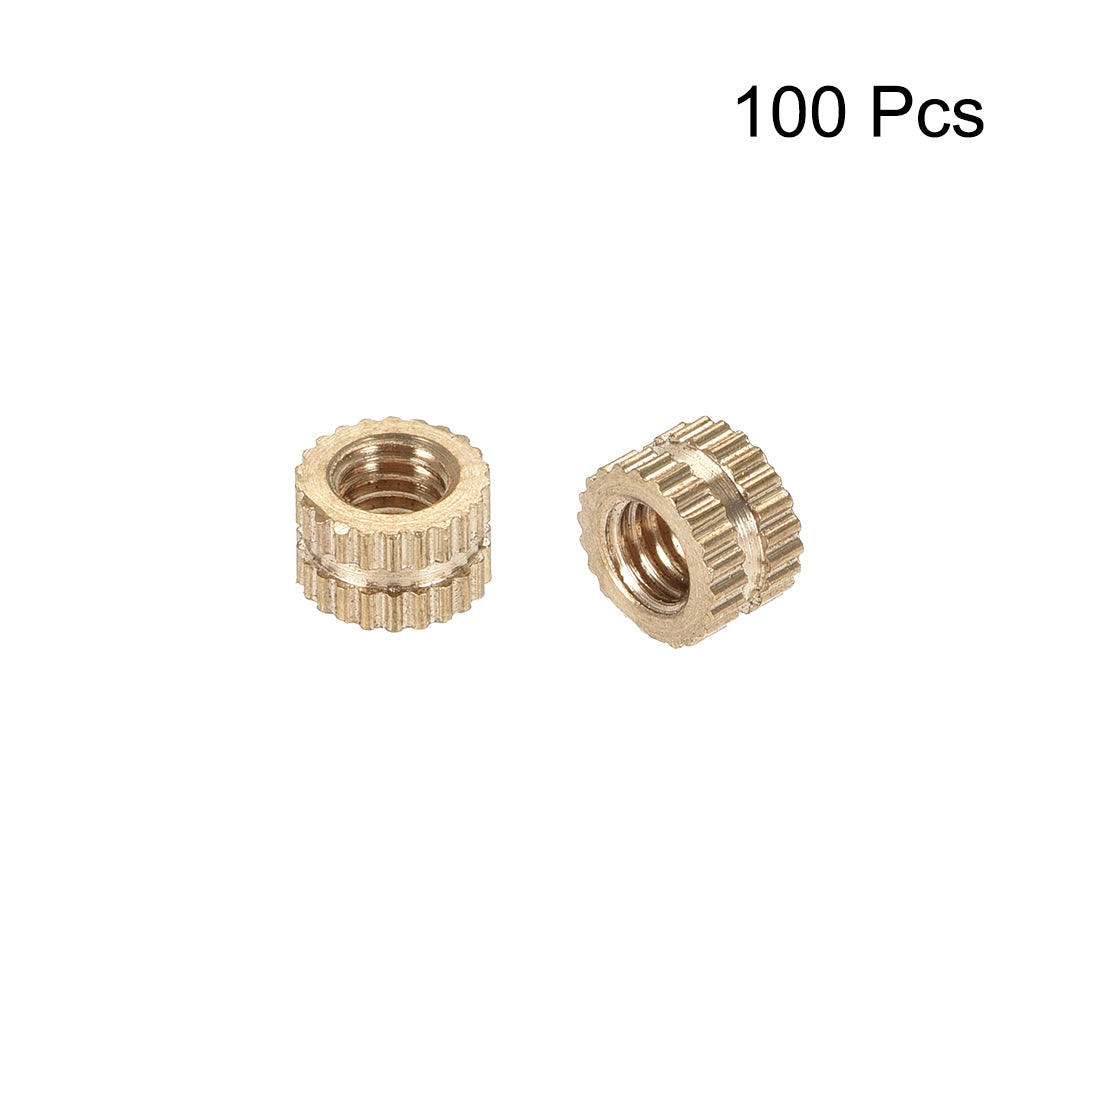 uxcell Uxcell M4 x 0.7mm Female Brass Knurled Threaded Insert Embedment Nut for 3D Printer, 100Pcs